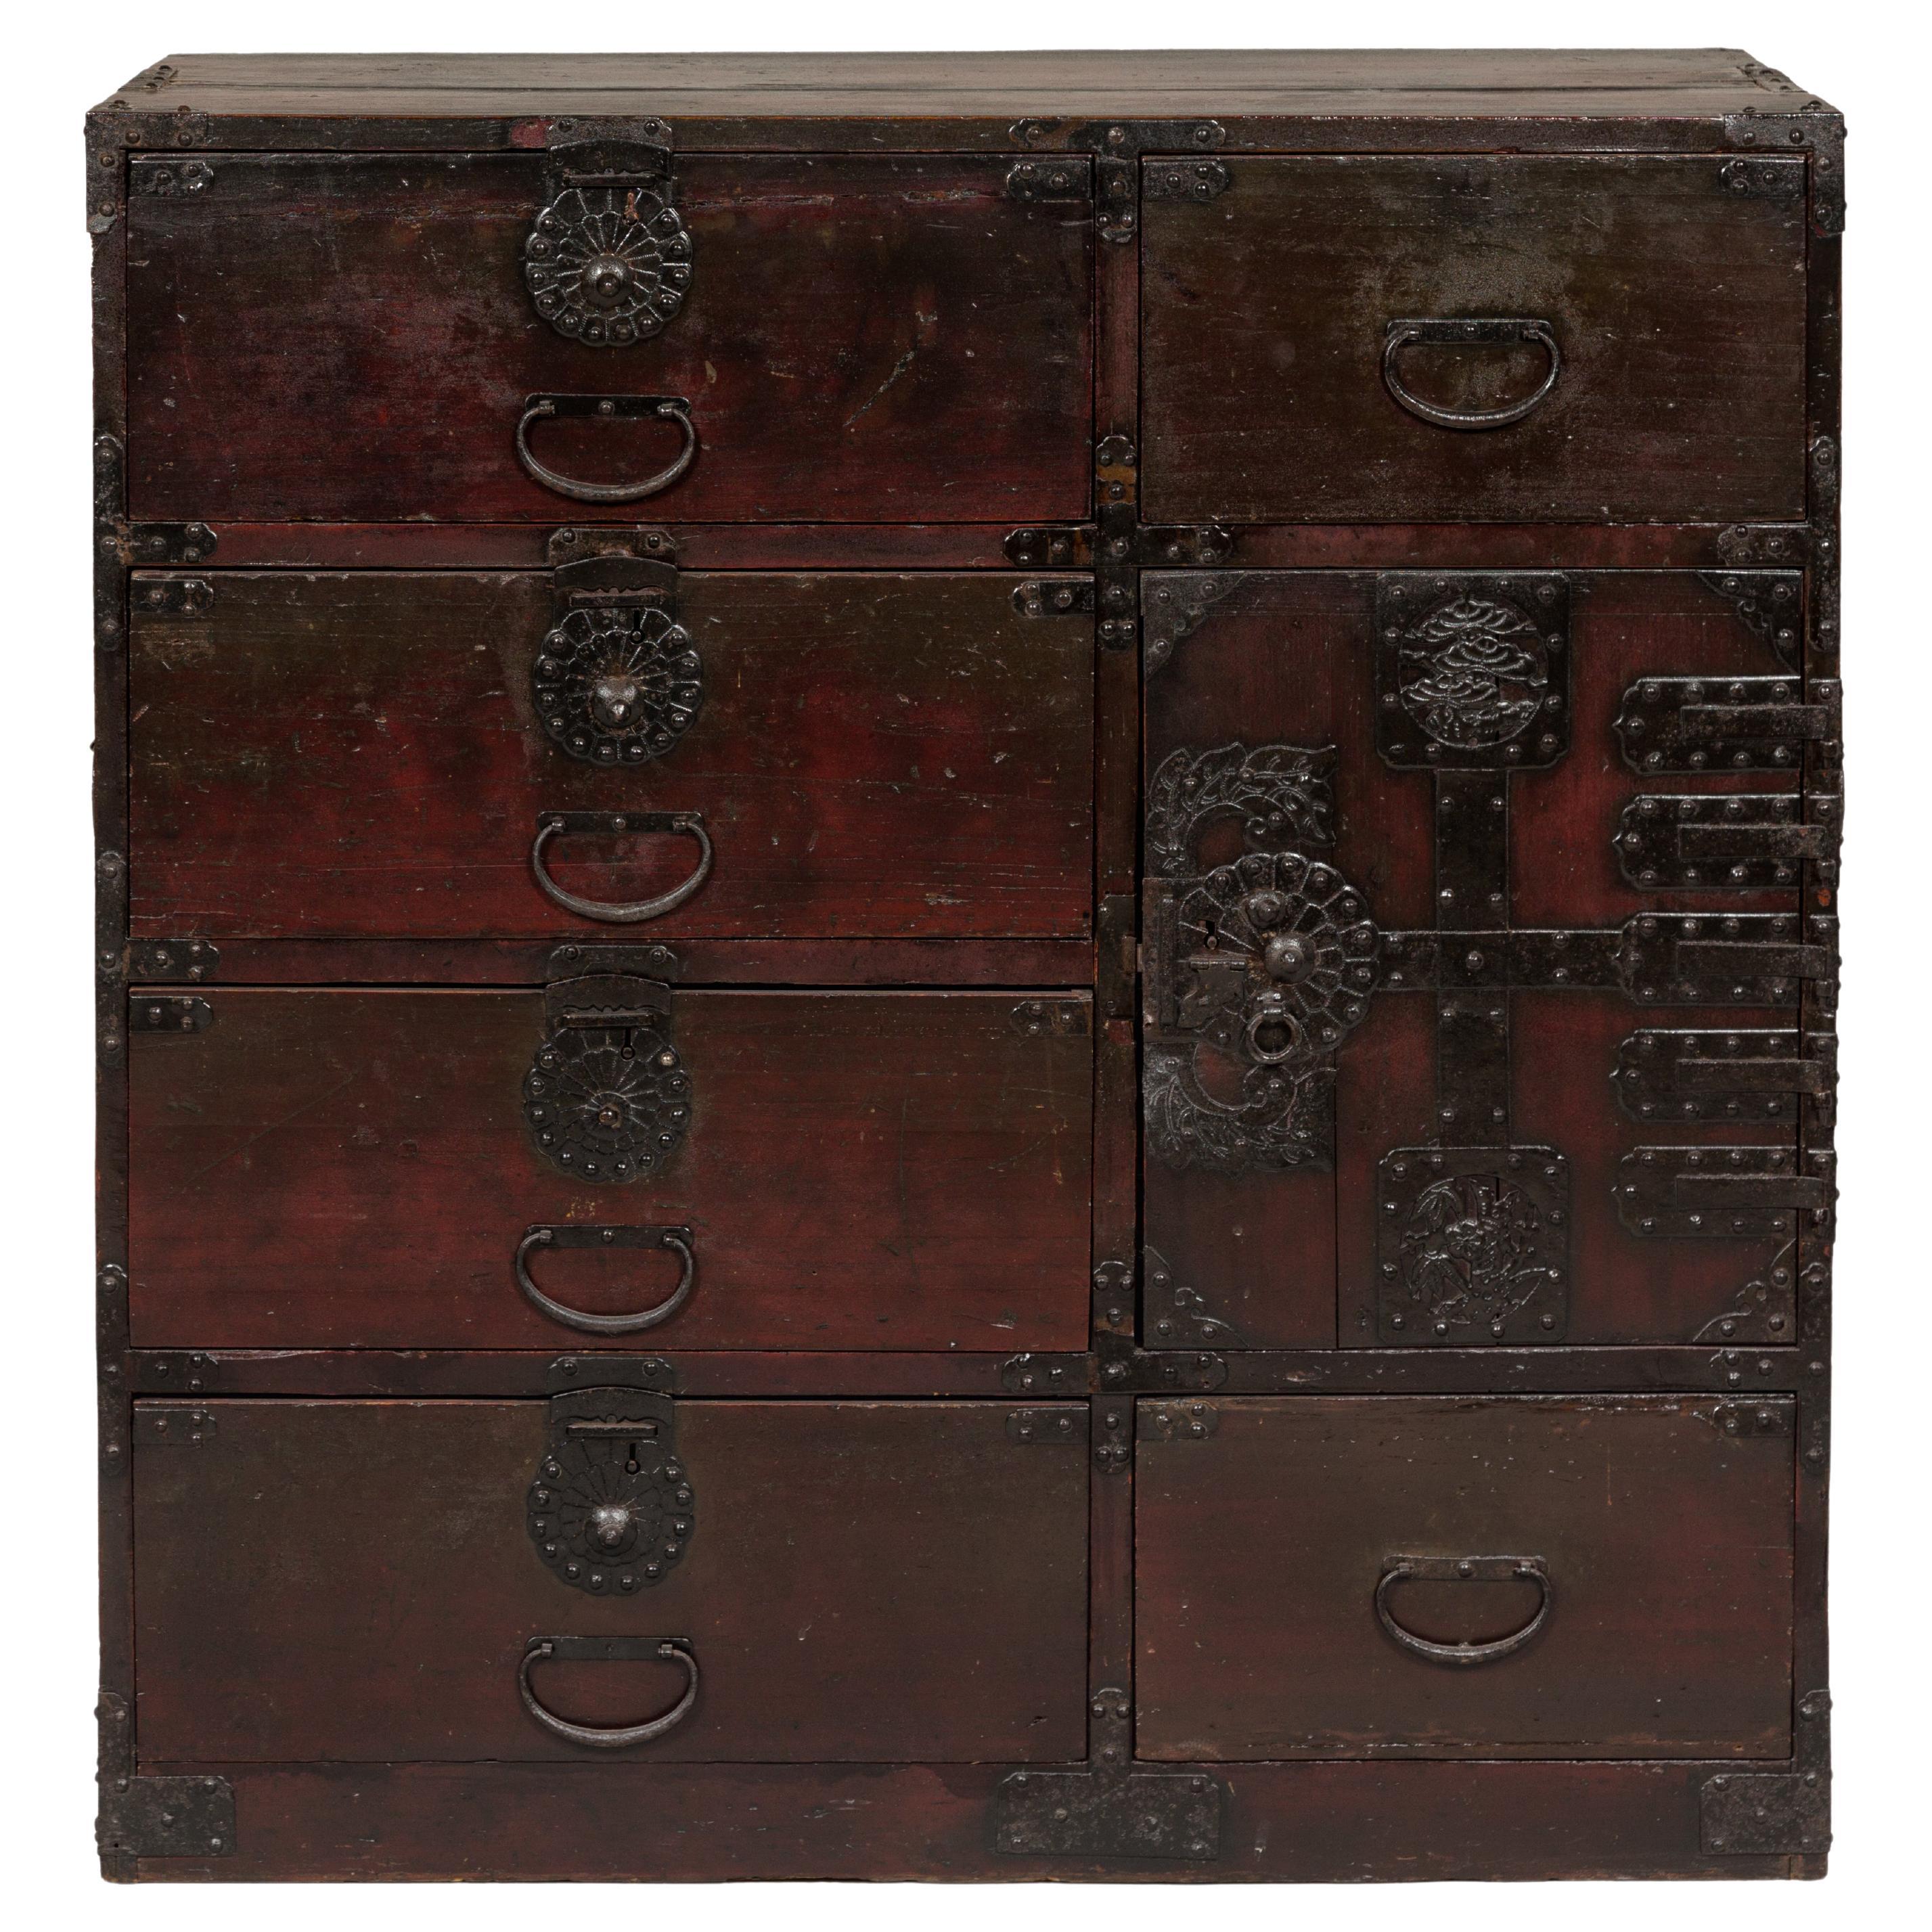 Japanese Meiji Period 19th Century Sendai Type Tansu Chest with Drawers and Safe